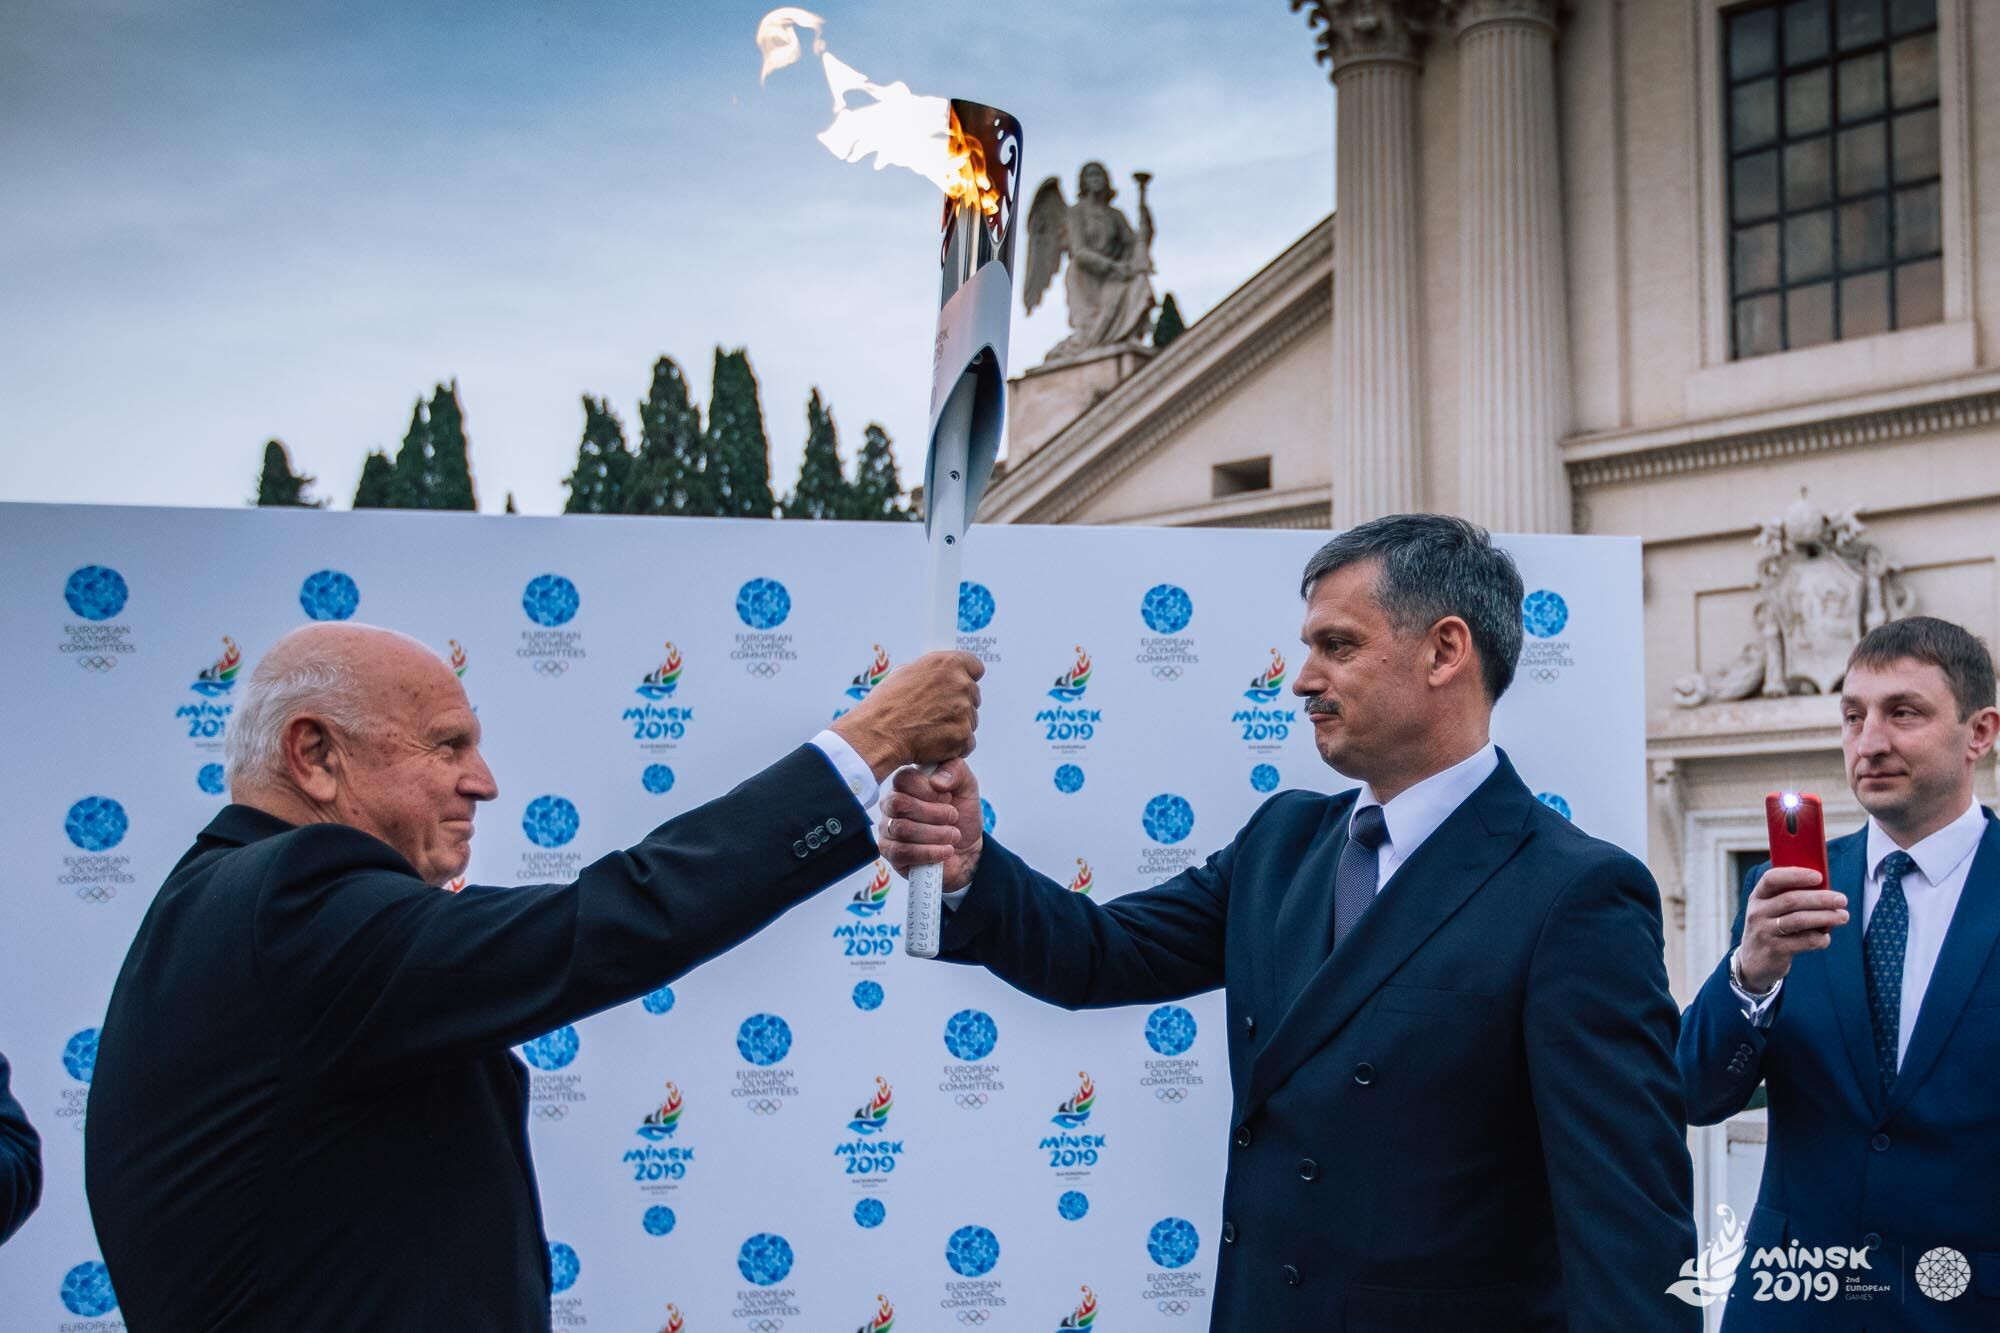 Relay of Peace for Minsk 2019 European Games is launched